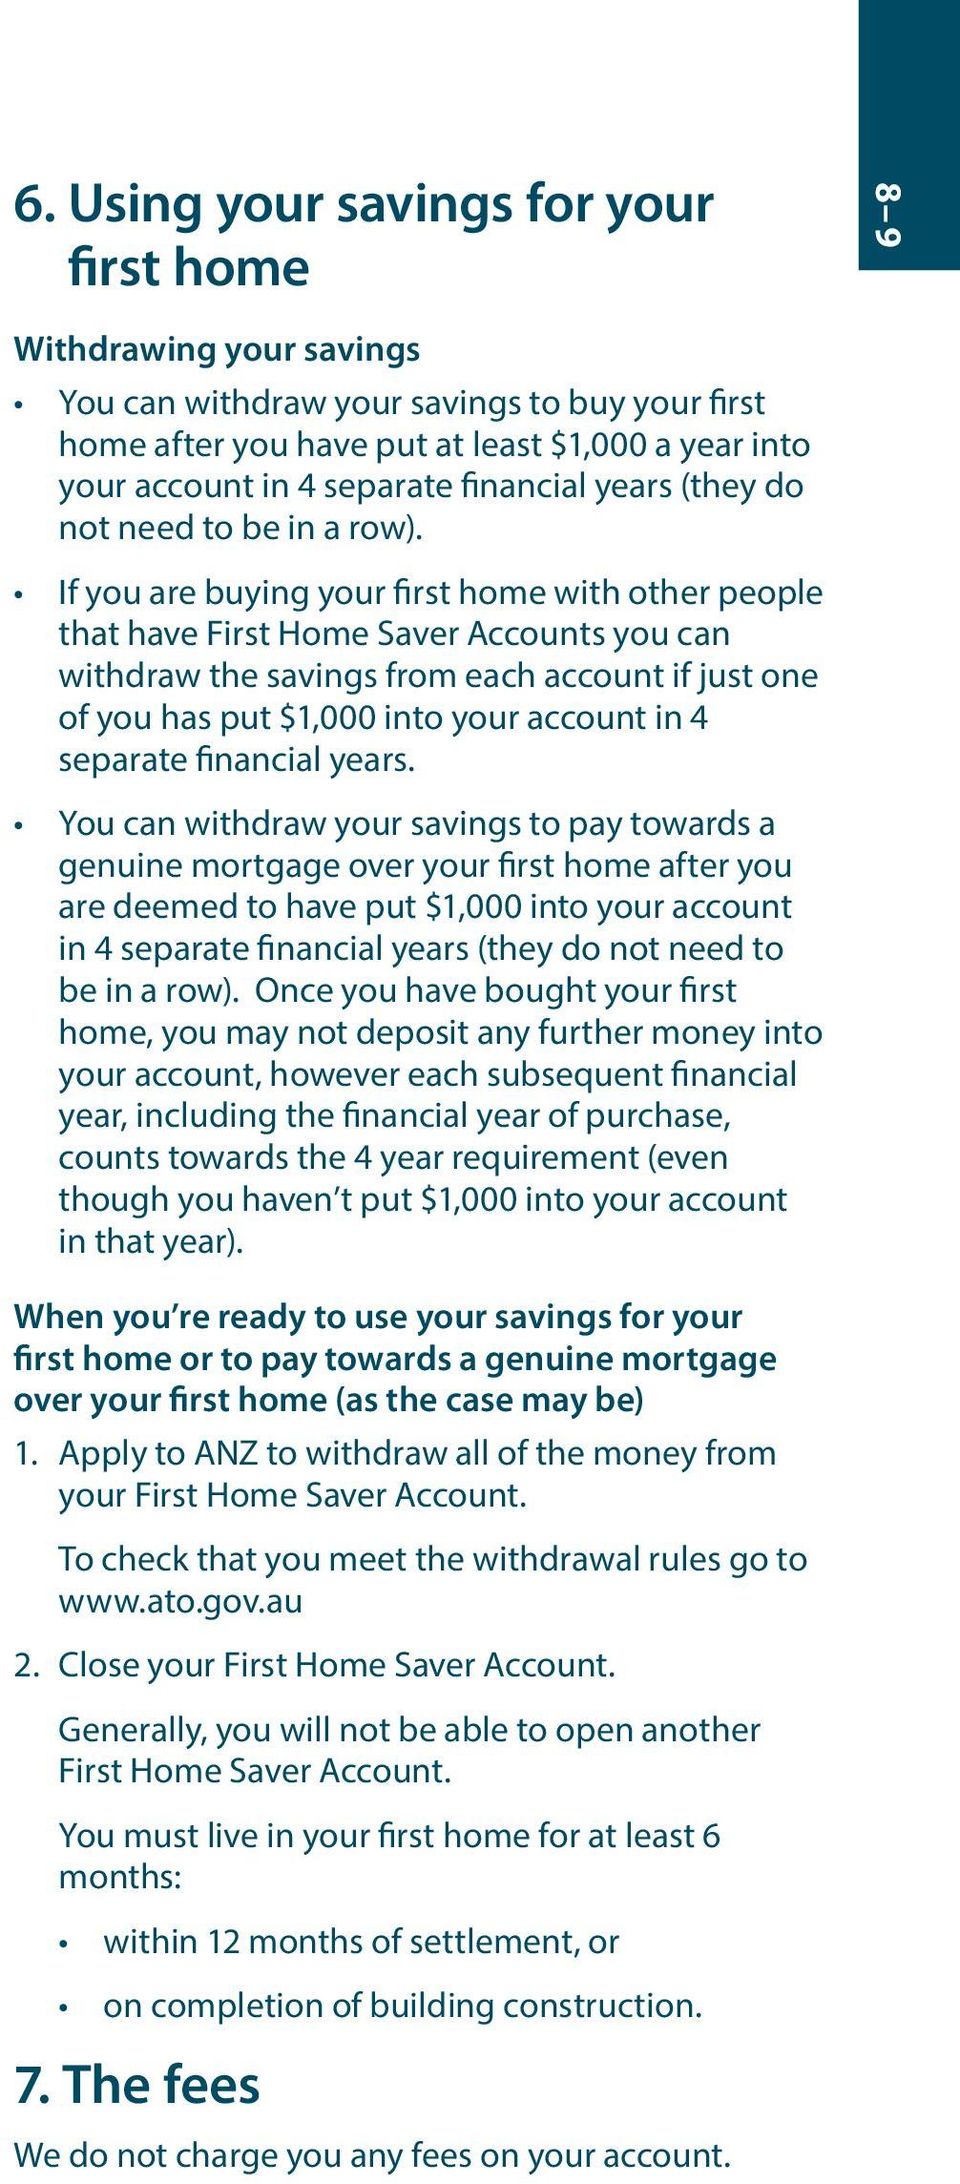 If you are buying your first home with other people that have First Home Saver Accounts you can withdraw the savings from each account if just one of you has put $1,000 into your account in 4